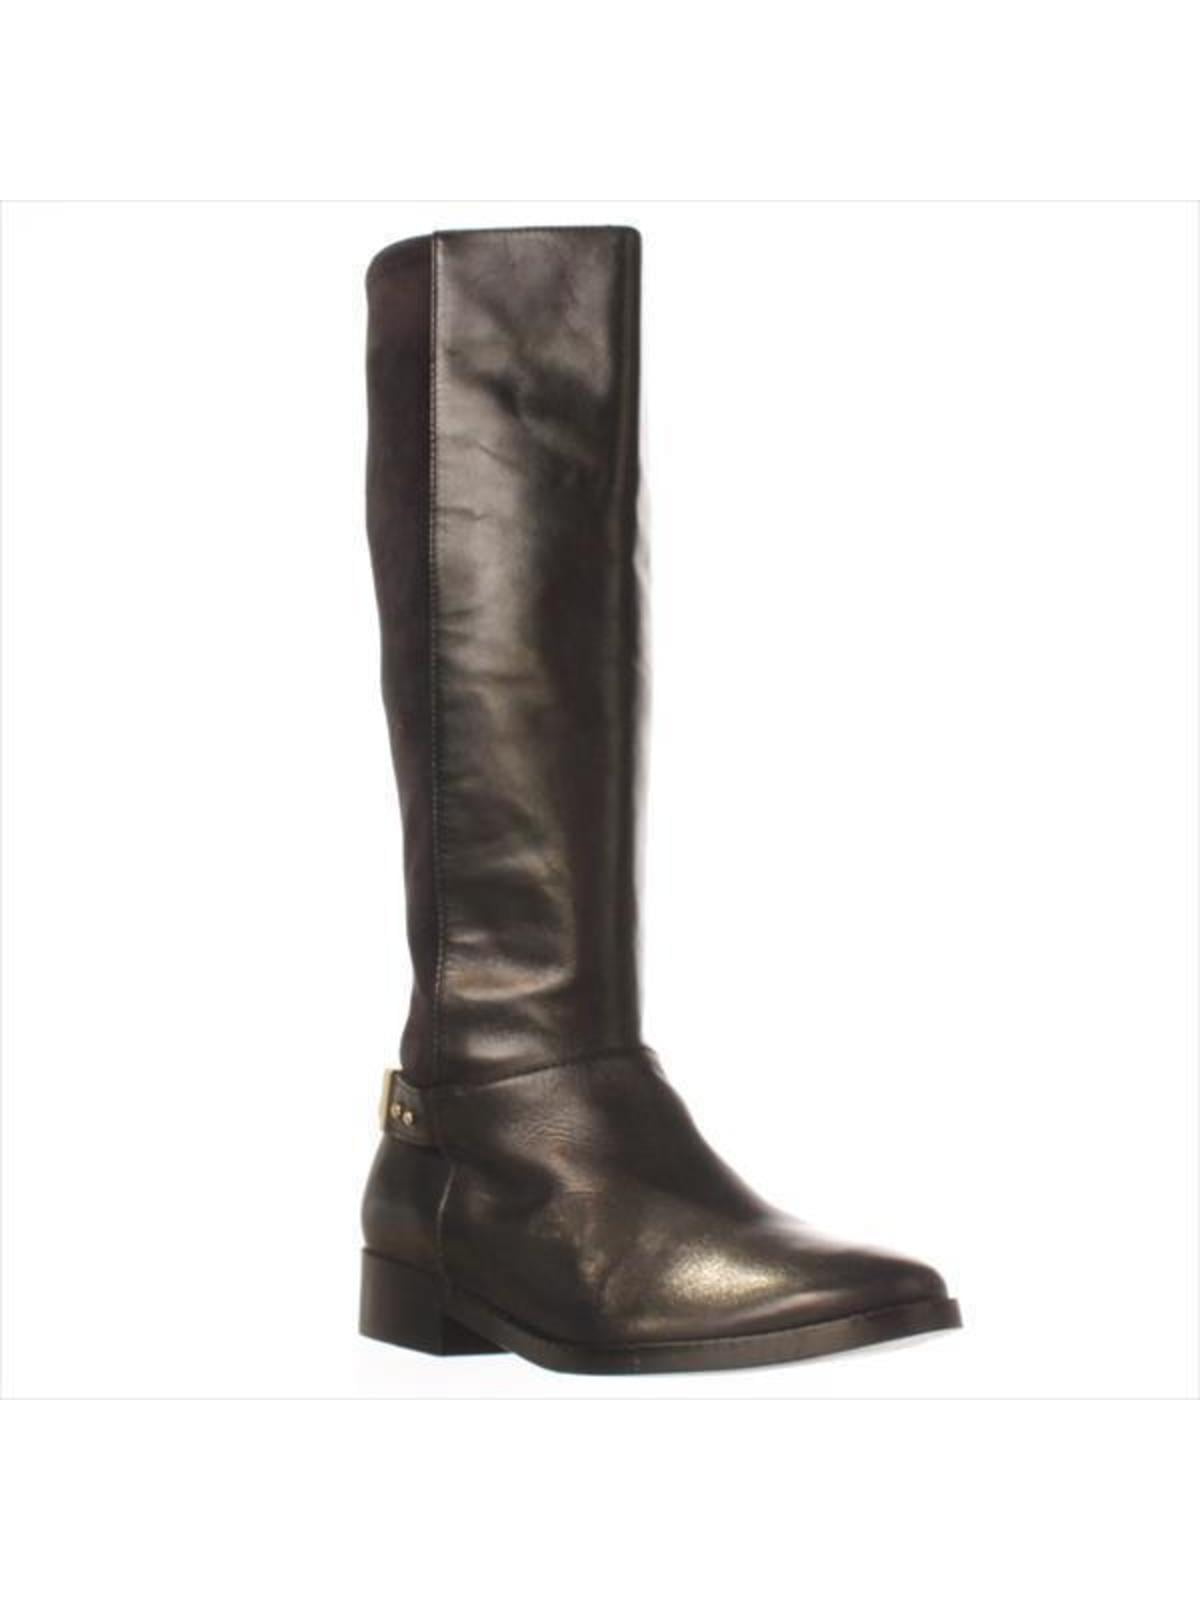 Womens Cole Haan Adler Tall Pull On Riding Boots, Black - Walmart.com